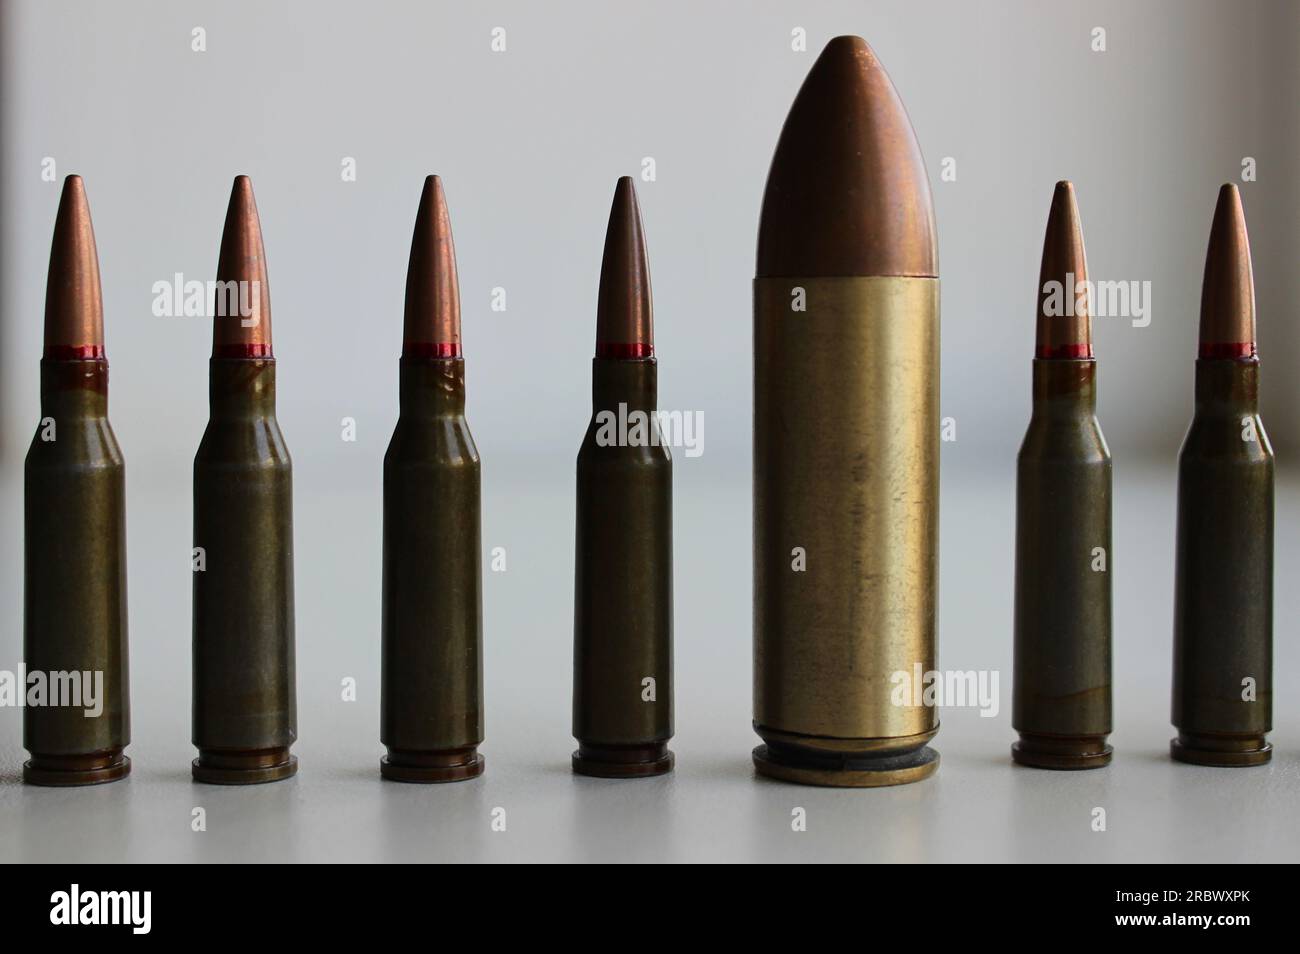 Closeup View Of A Row With Same Ammunition And Huge Cartridge In Line. Concept Image Symbolizing Diversity And Inclusion Stock Photo